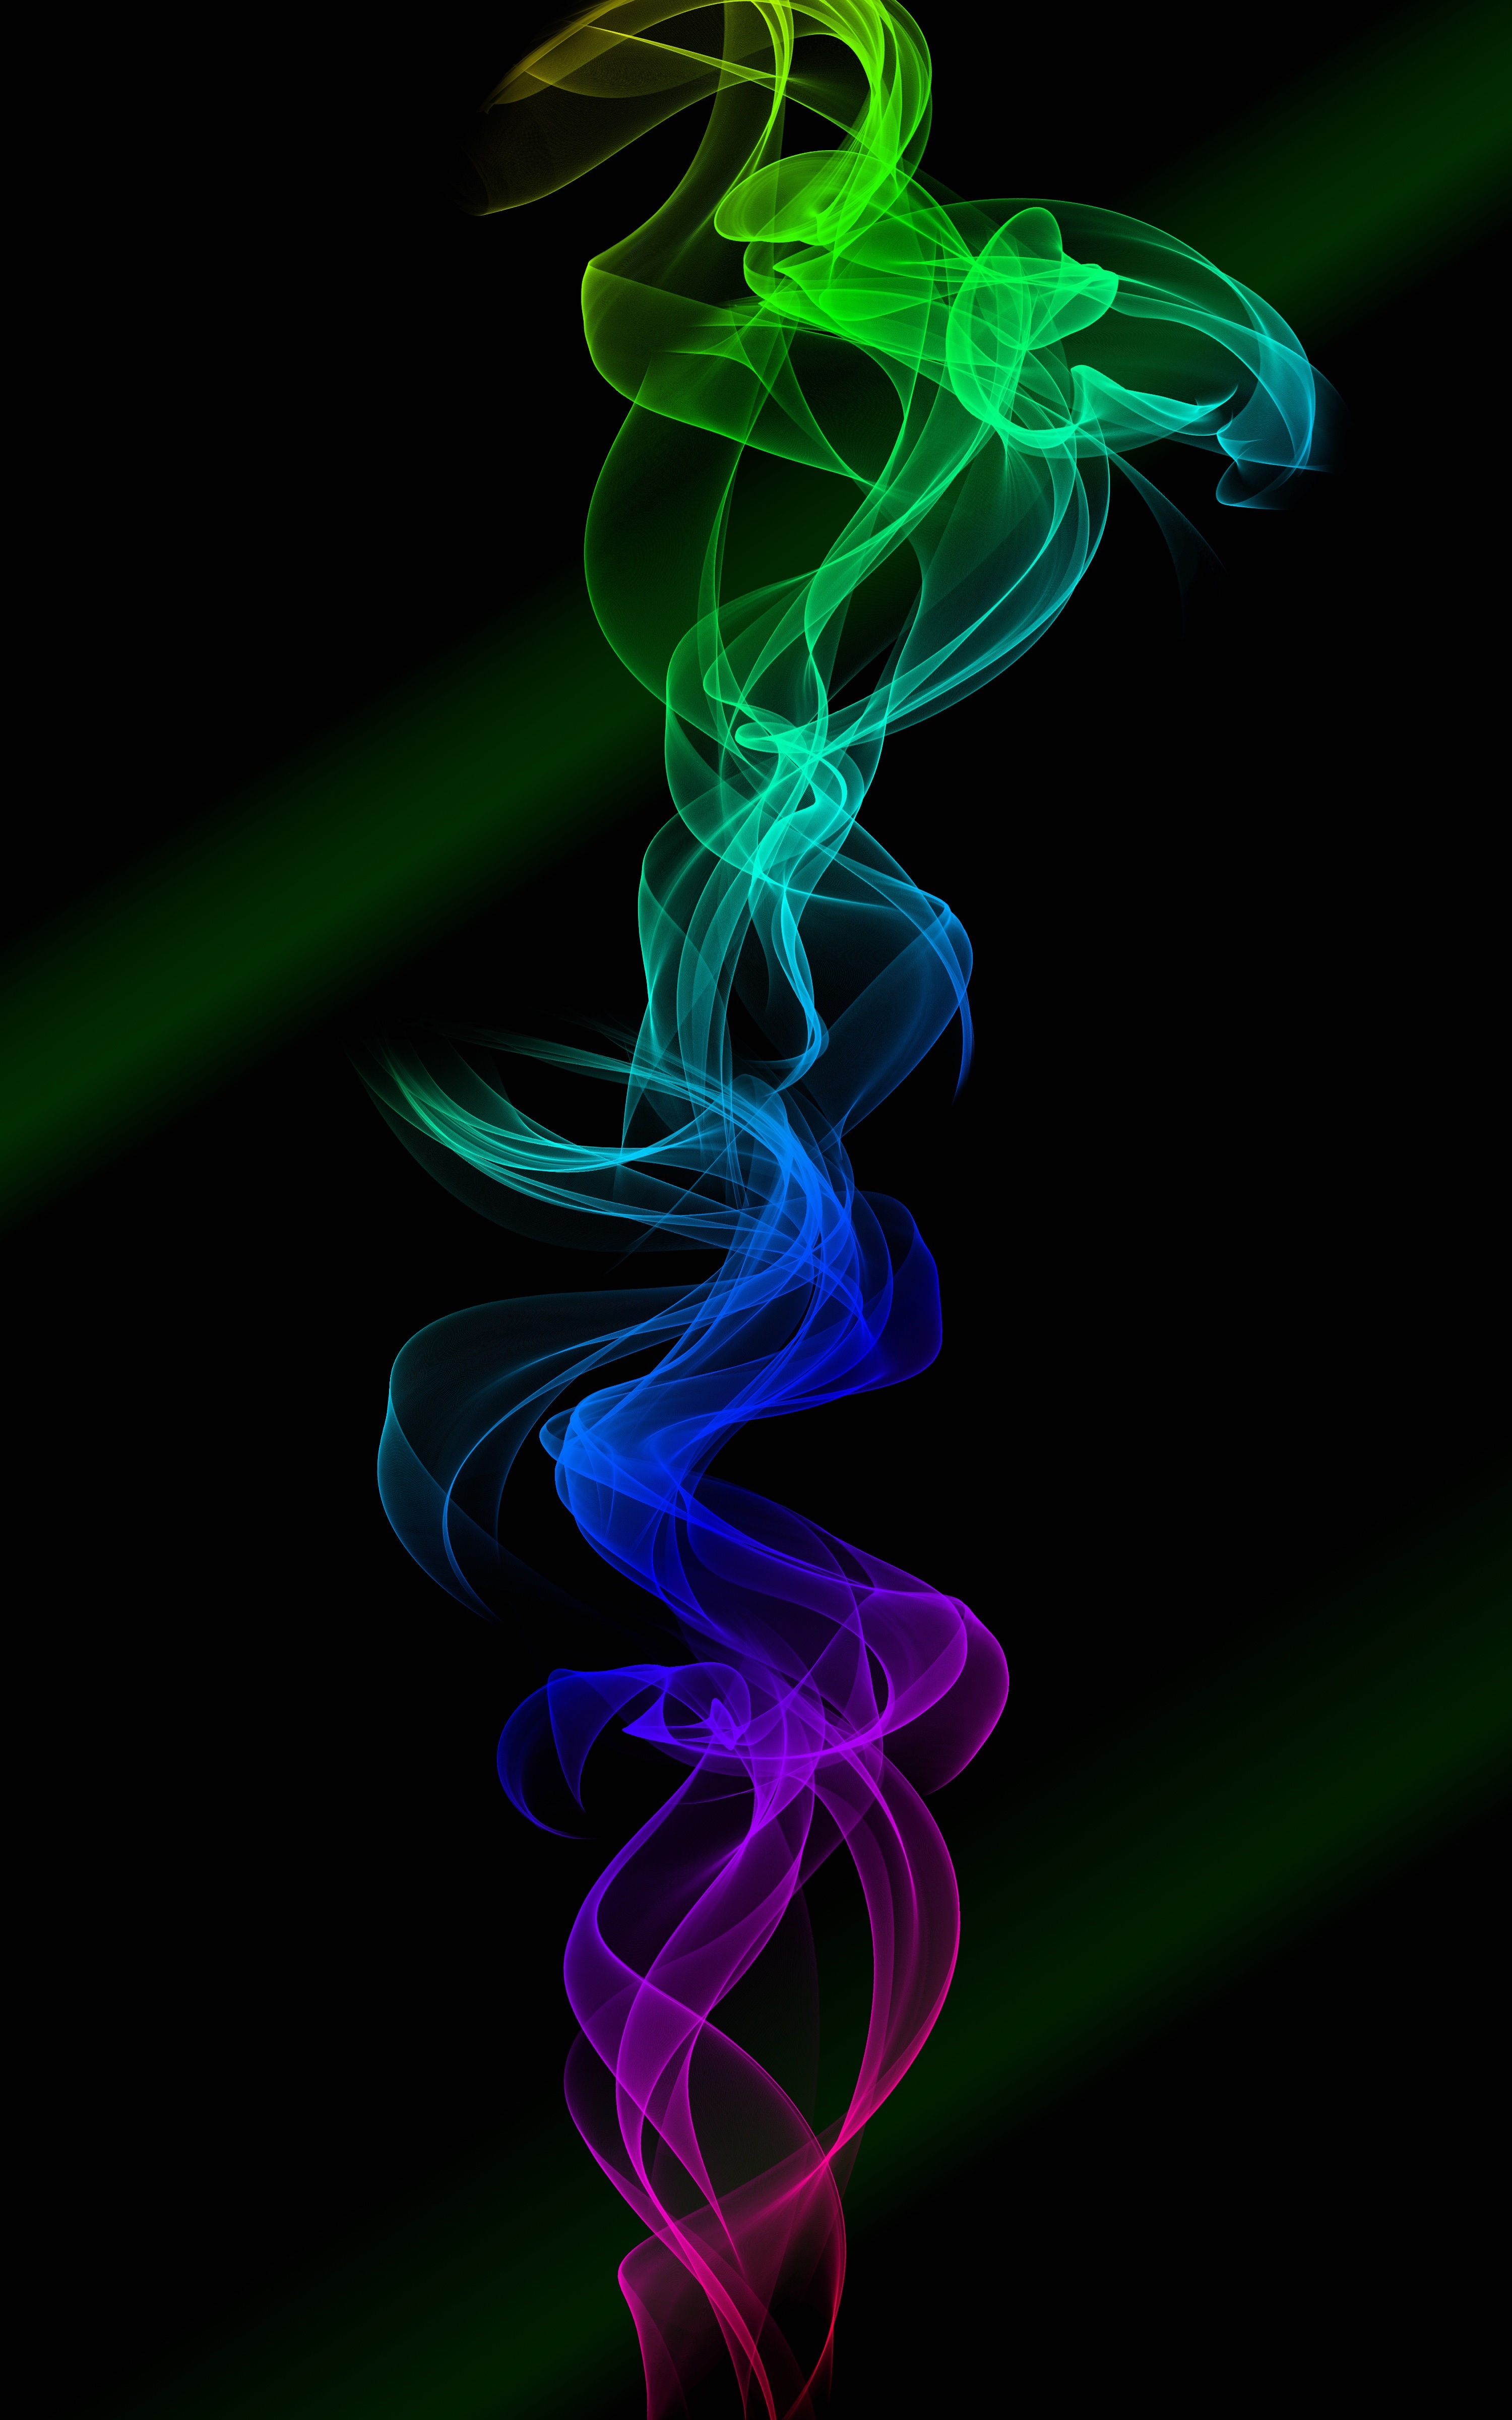 clots, motley, abstract, multicolored, smoke, twisted, intertwined